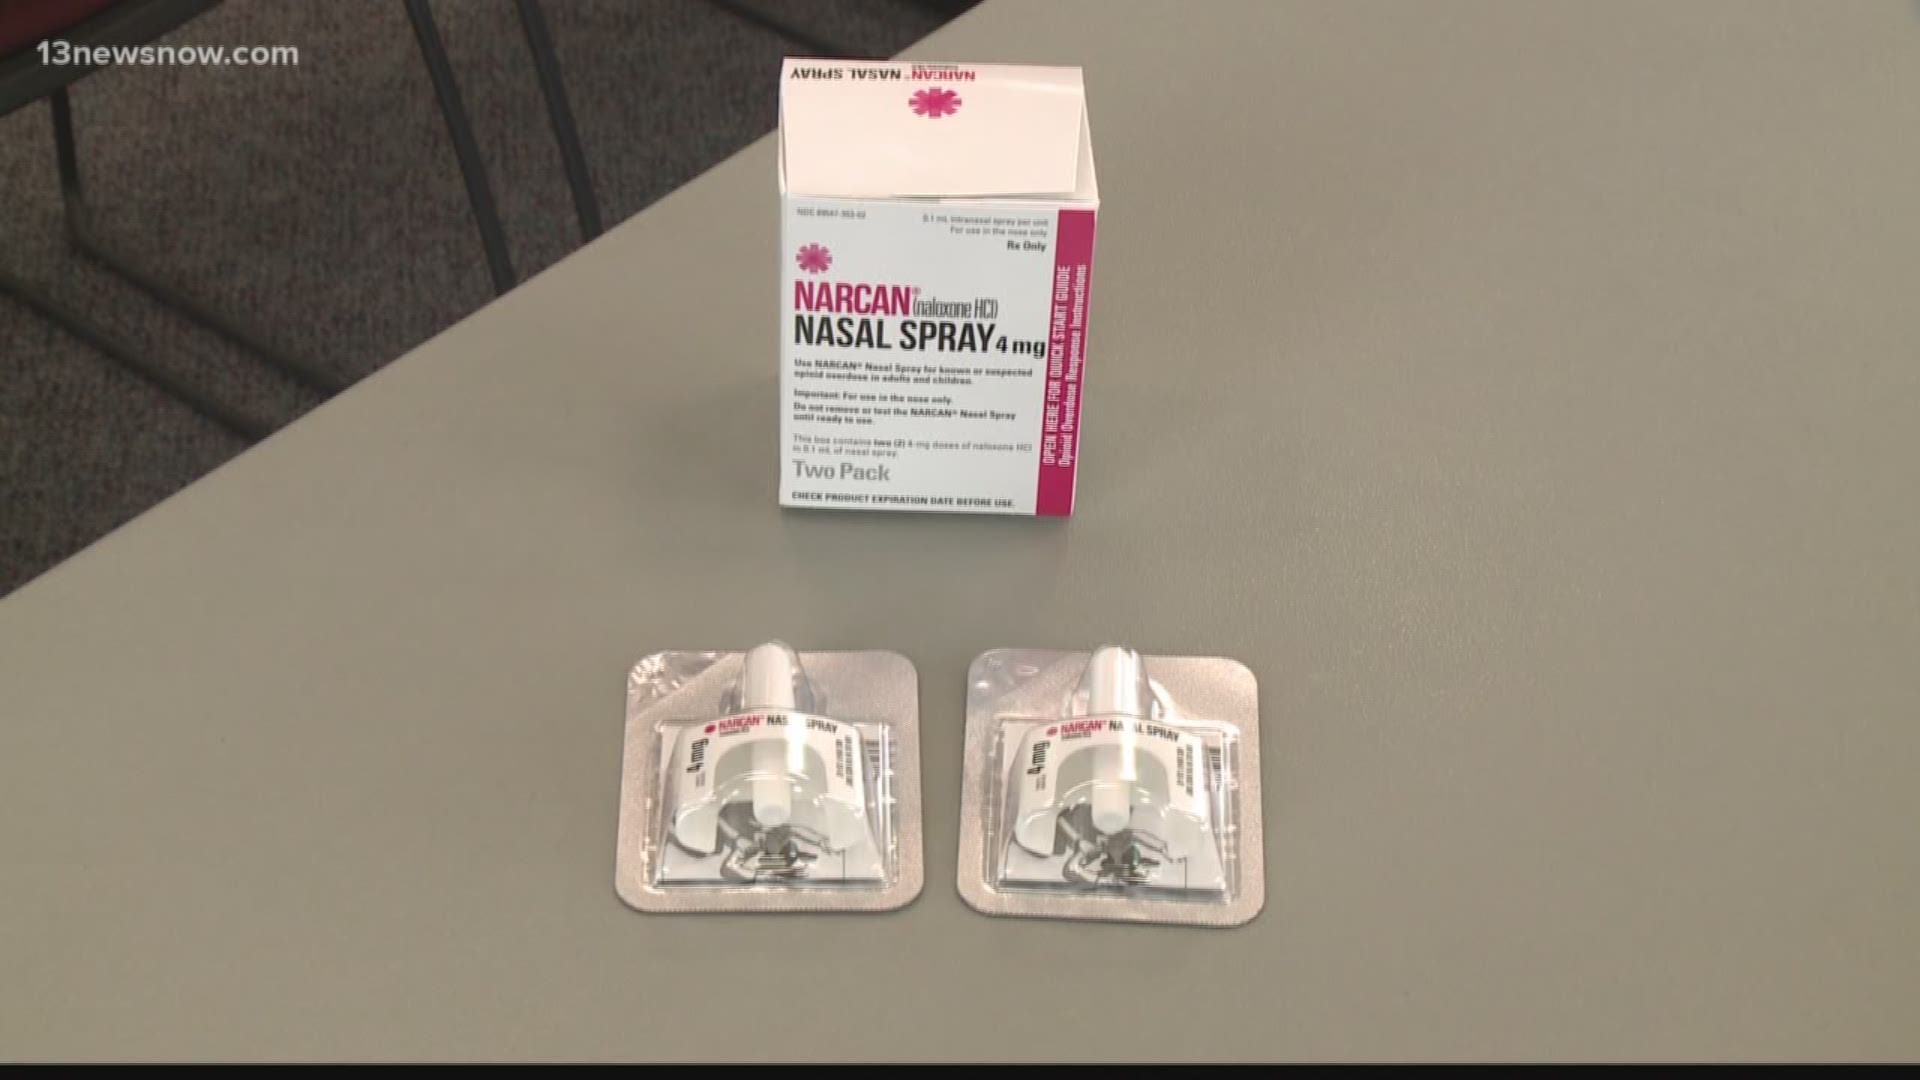 A spike in opioid overdoses has led the Elizabeth City Chief of Police and the Pasquotank County Sheriff to partner up and try to tackle the problem head-on.